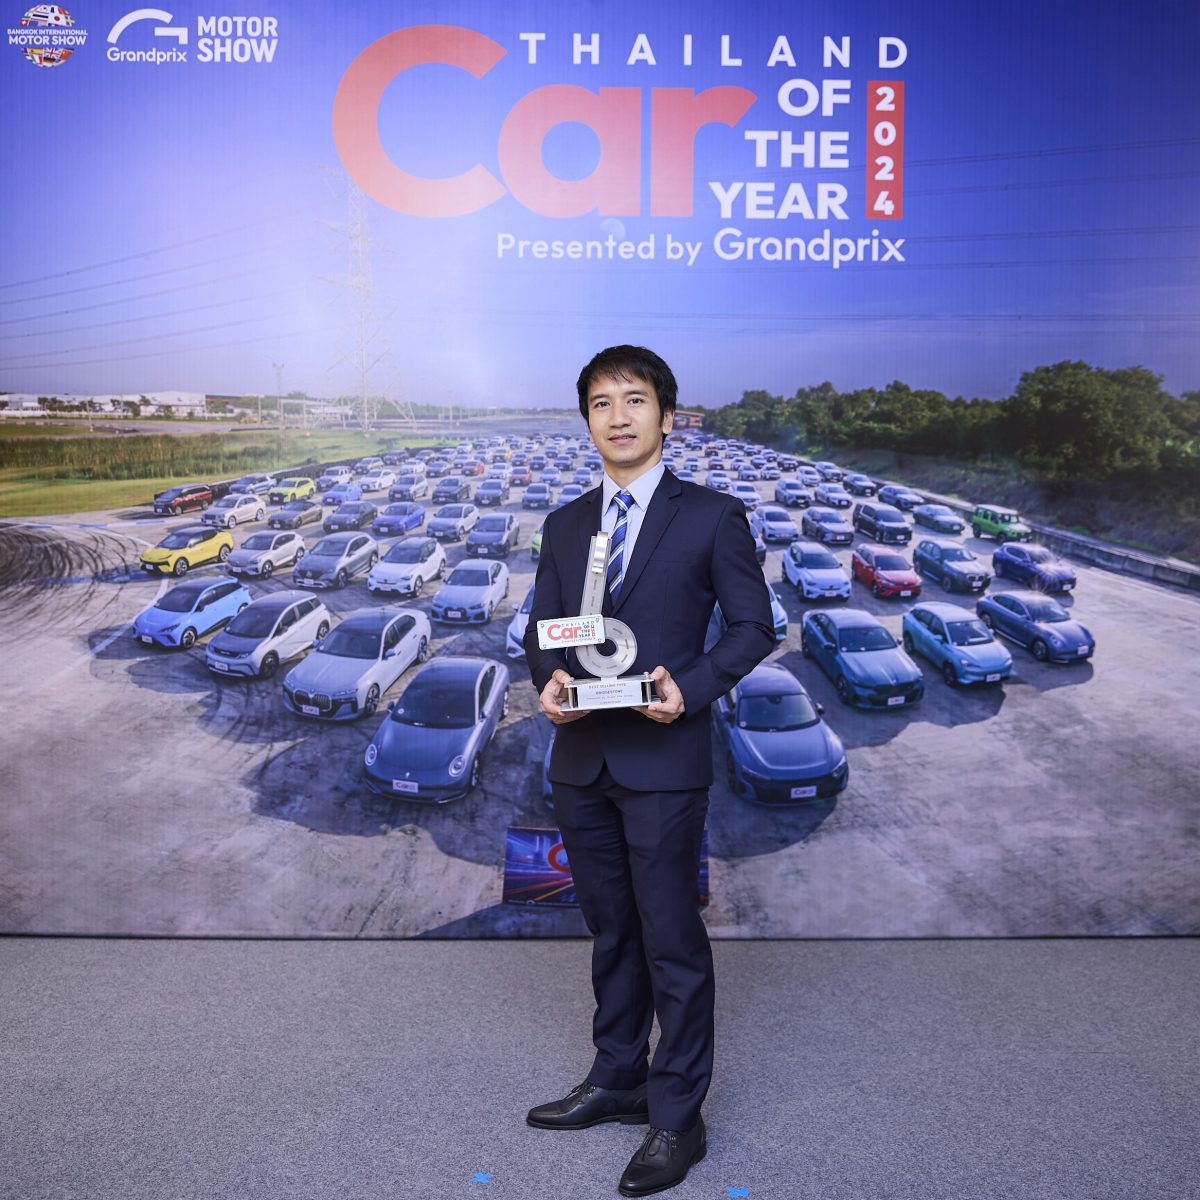 Bridgestone Wins BEST SELLING TYRE Award by Grand Prix for 26 Consecutive Years in CAR BIKE OF THE YEAR 2024, Fortifying Leadership Position in Thailand's Automotive